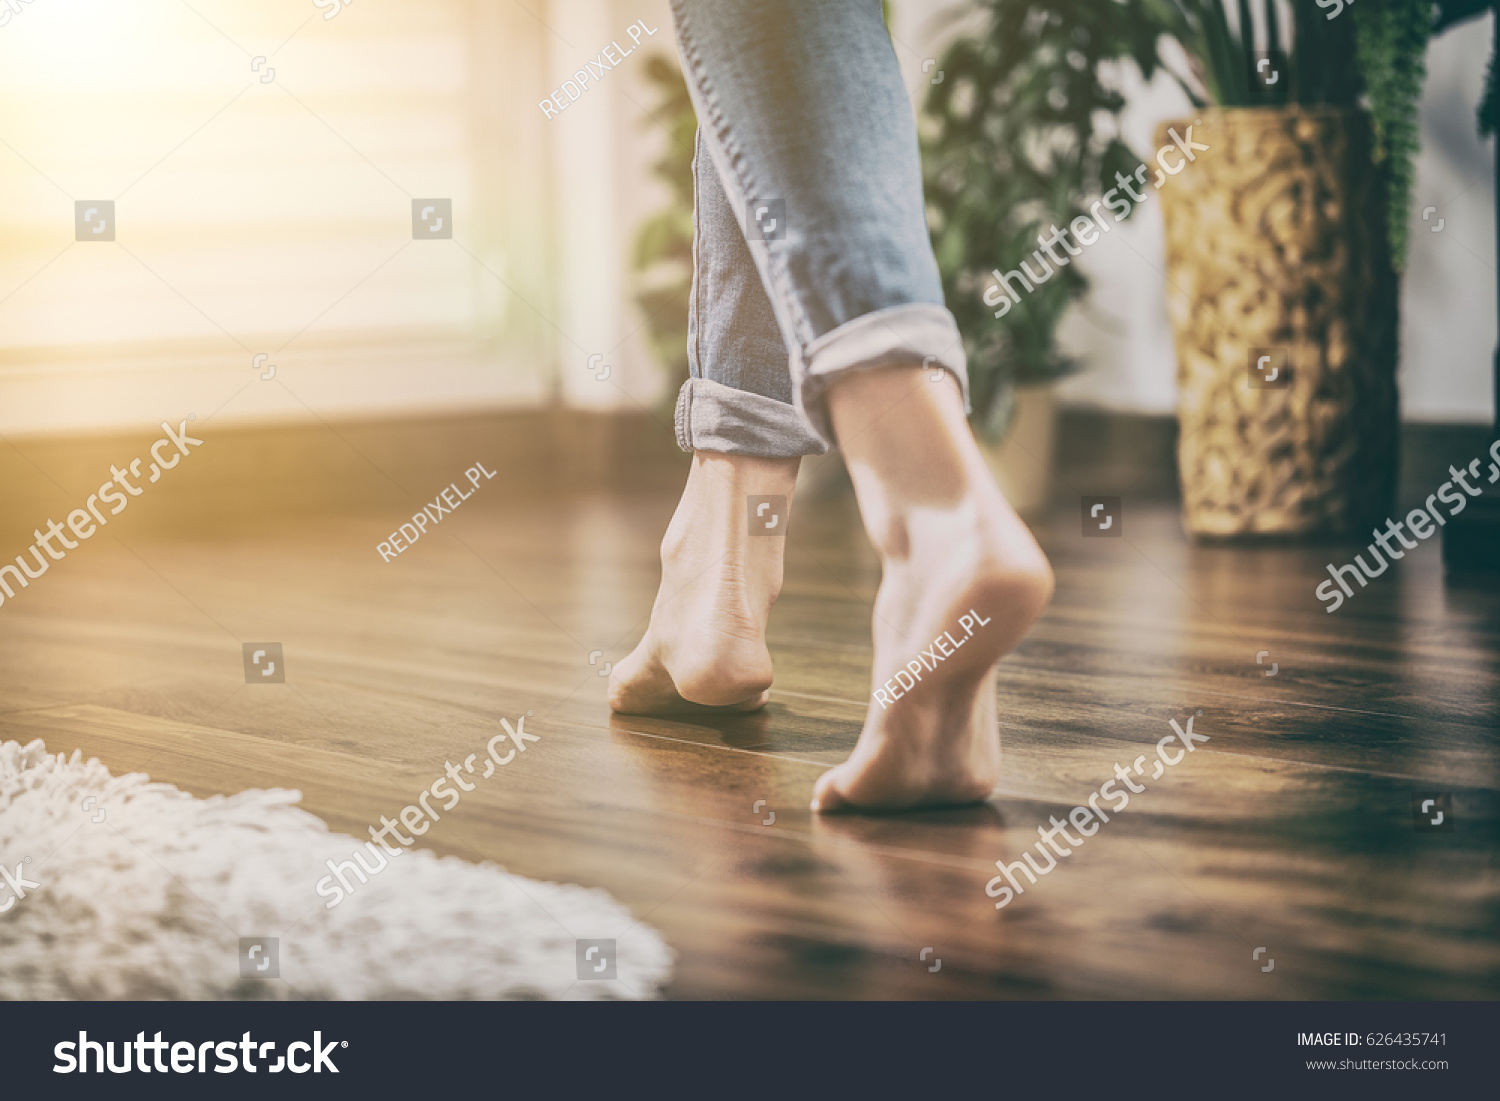 Floor heating. Young woman walking in the house on the warm floor. Gently walked the wooden panels. #626435741